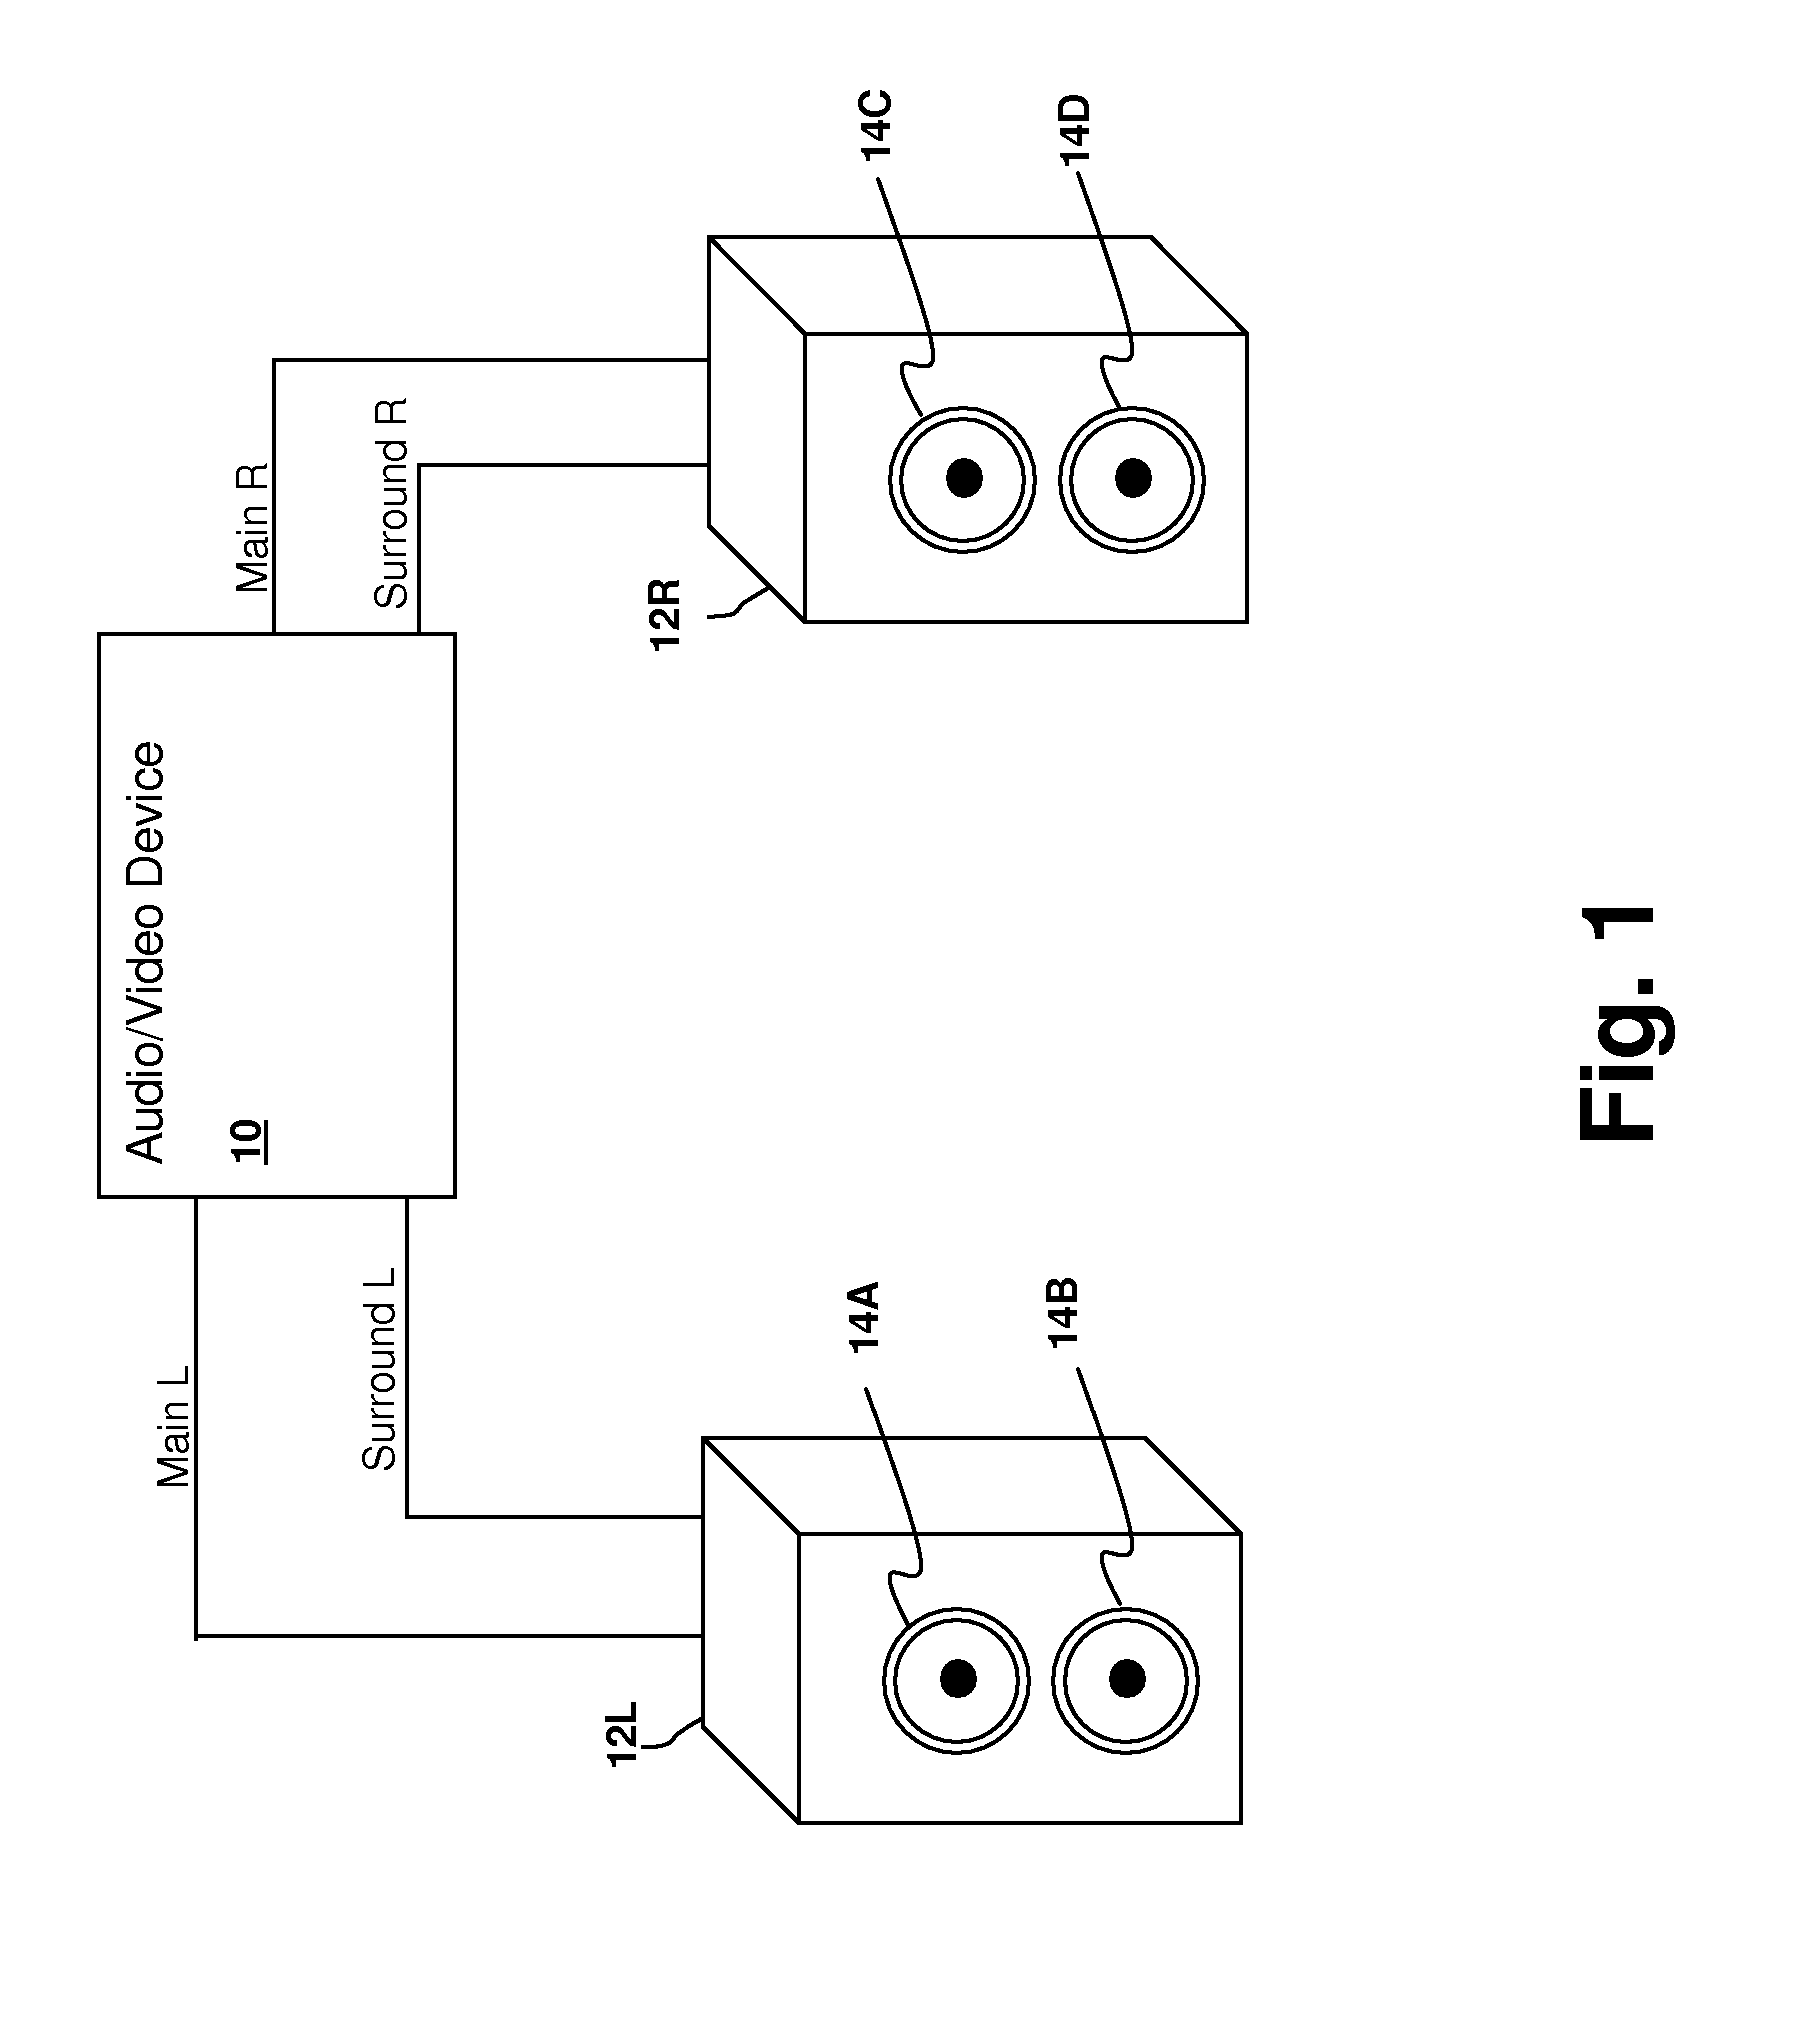 Method and system for surround sound beam-forming using vertically displaced drivers